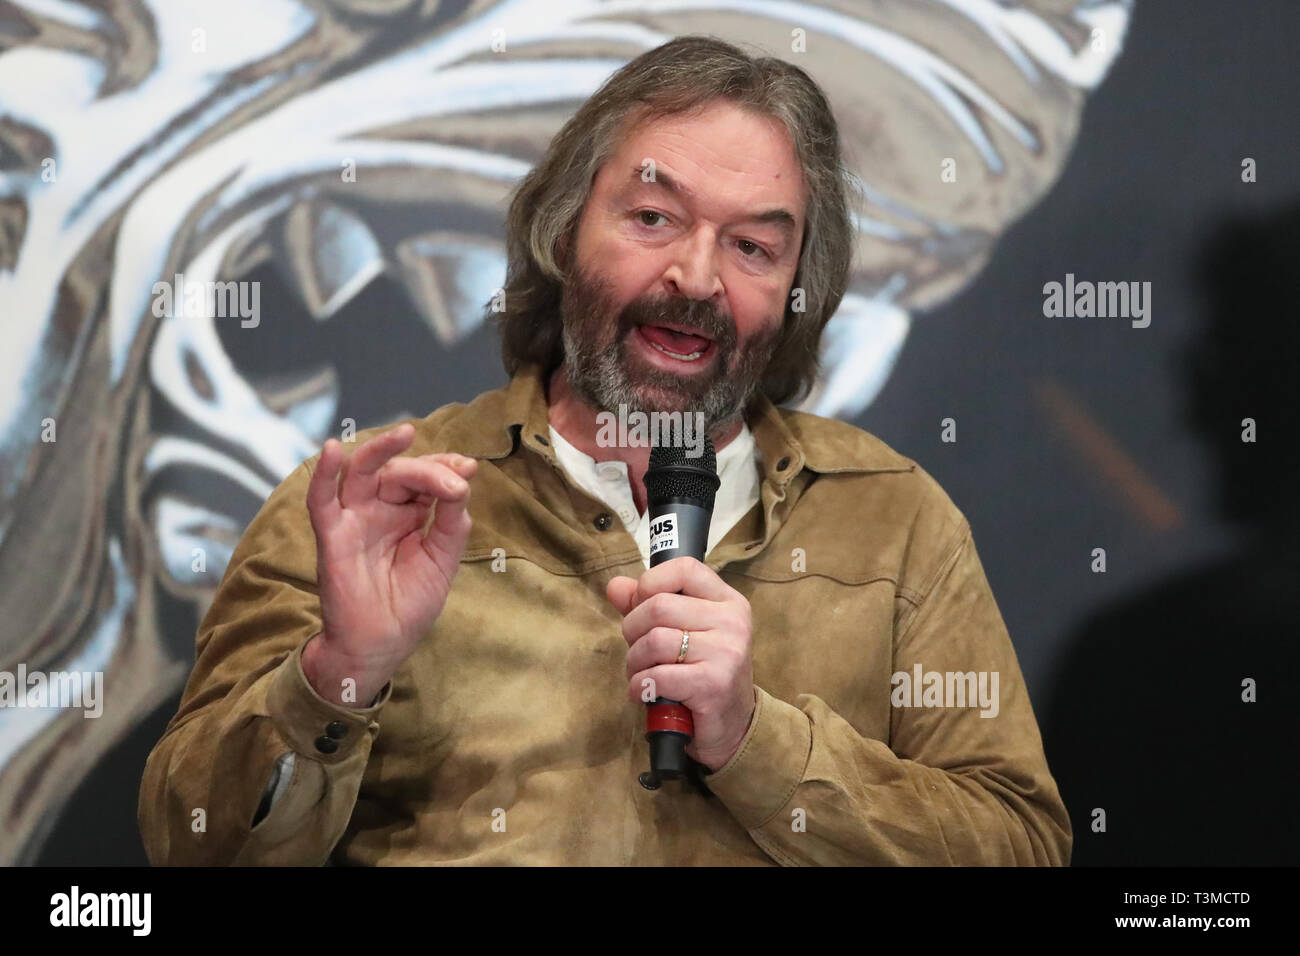 Actor Ian Beattie, who plays Ser Meryn Trant in Game of Thrones, at the launch of the Game of Thrones touring exhibition at the Titanic Exhibition Centre in Belfast. Stock Photo